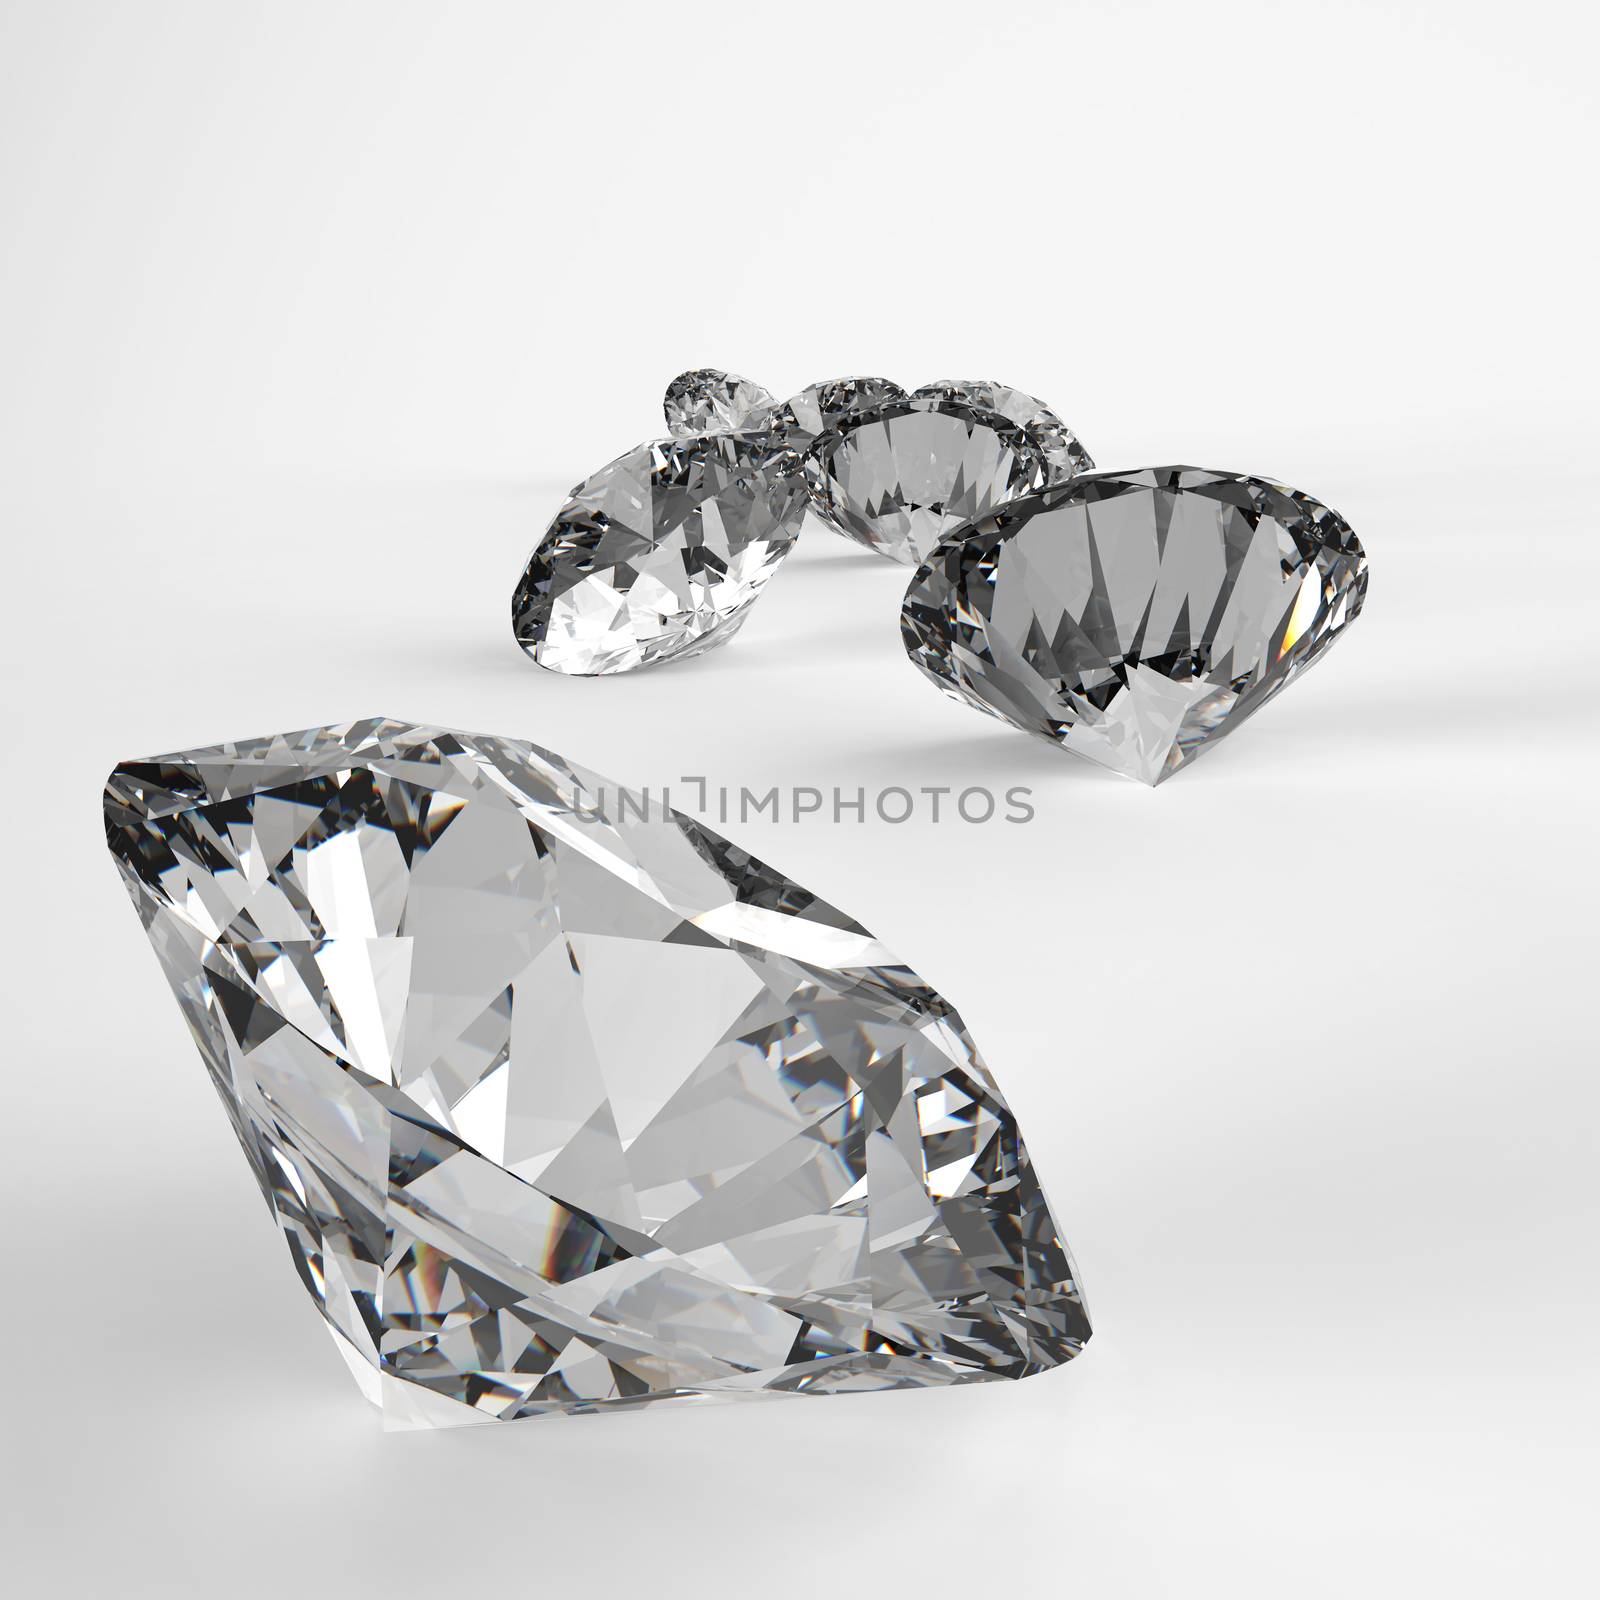 Diamonds 3d in composition as concept by everythingpossible